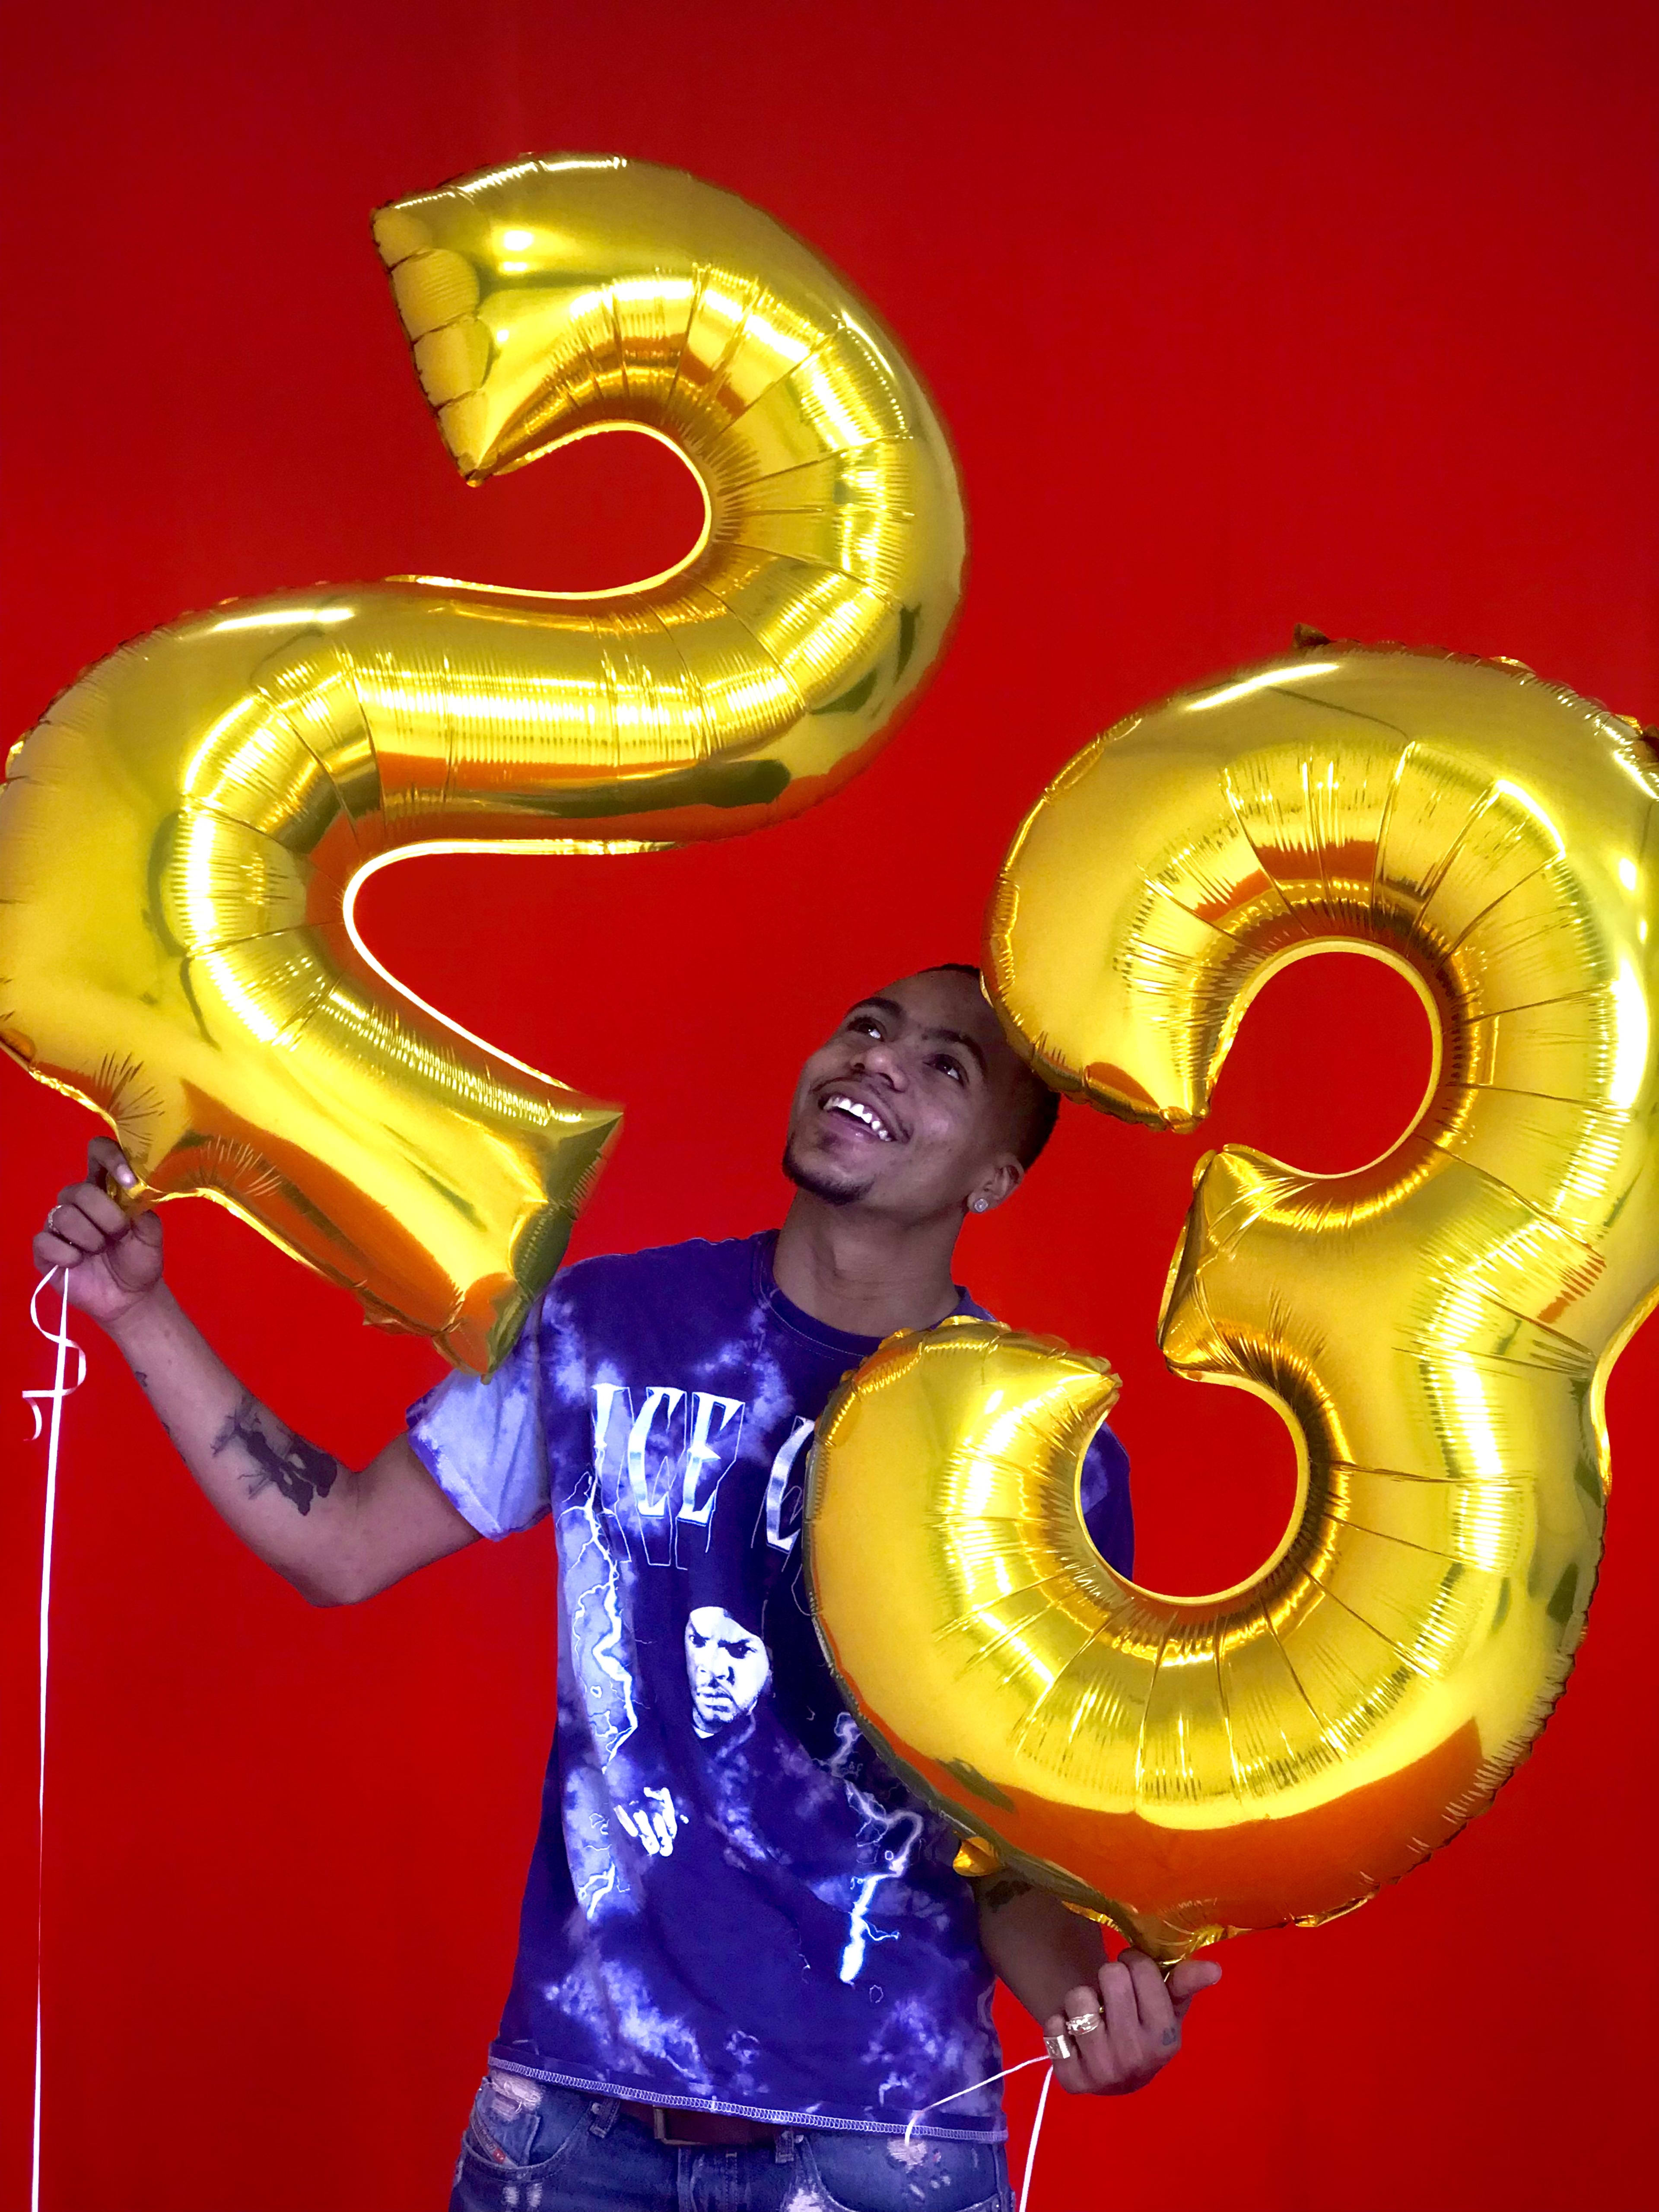 A man holding a bunch of balloons in front of a red background for a birthday photoshoot.